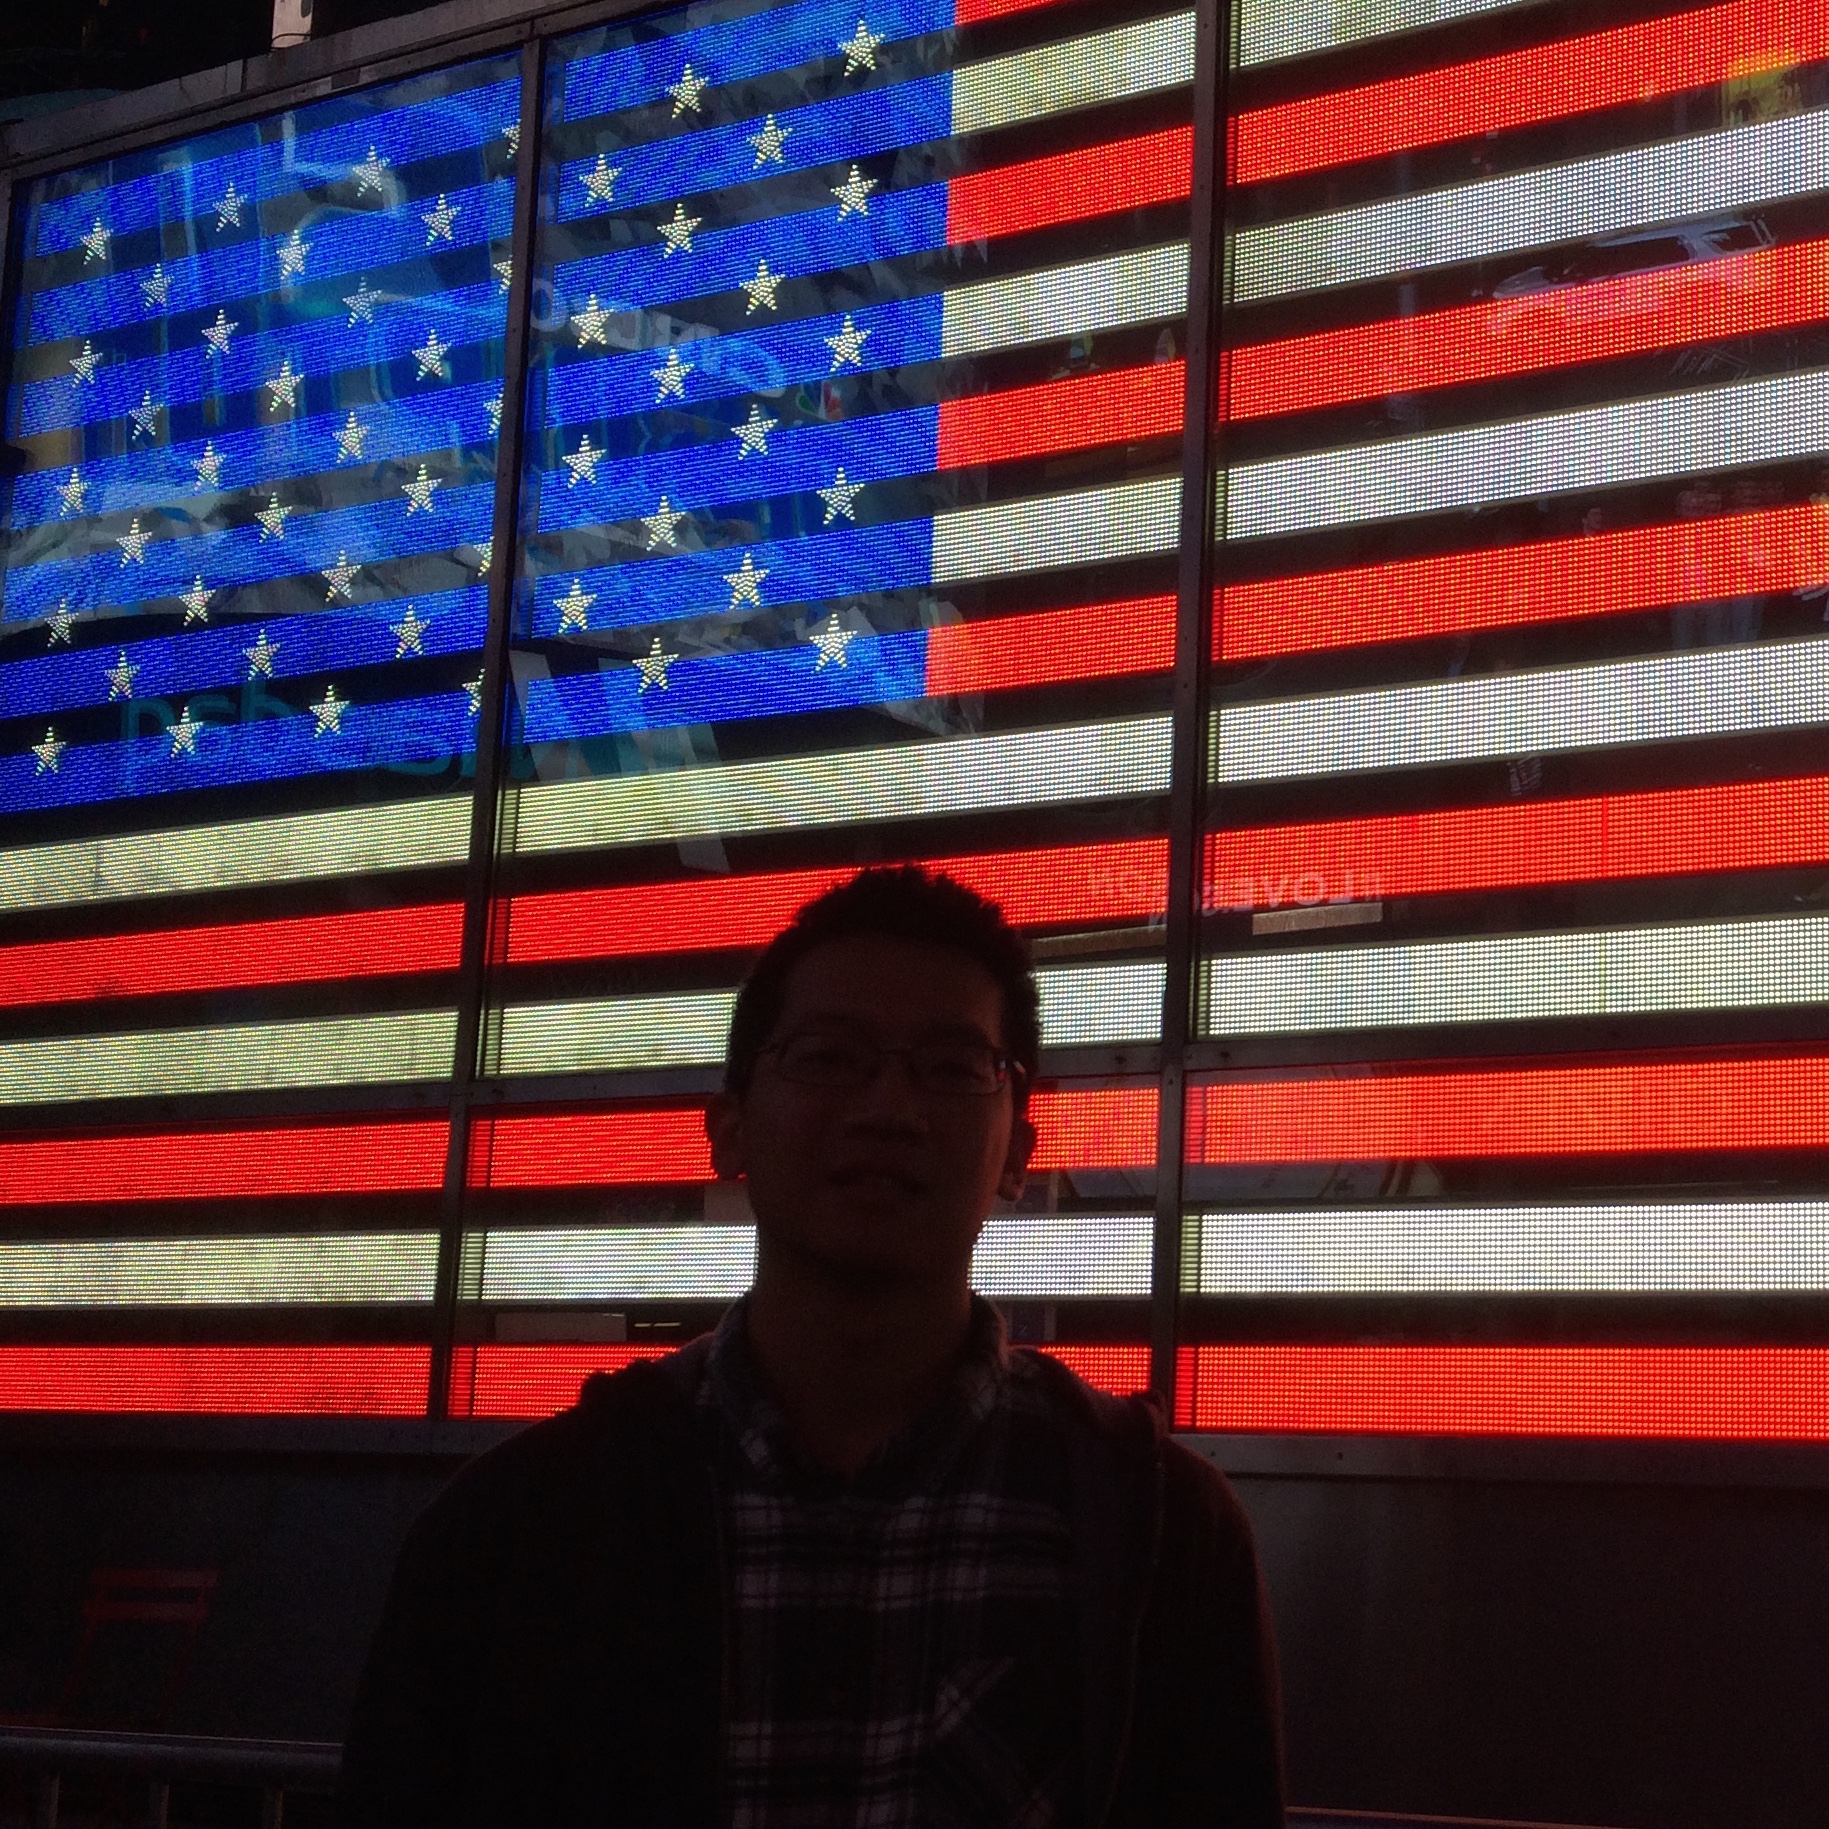 'American Glory' is the debut album from Eddy Yang. It is the first debut album in history to be released on surround sound upon initial release (5.1 surround sound, 24-bit/96 kHz). It was released on May 24, 2019.